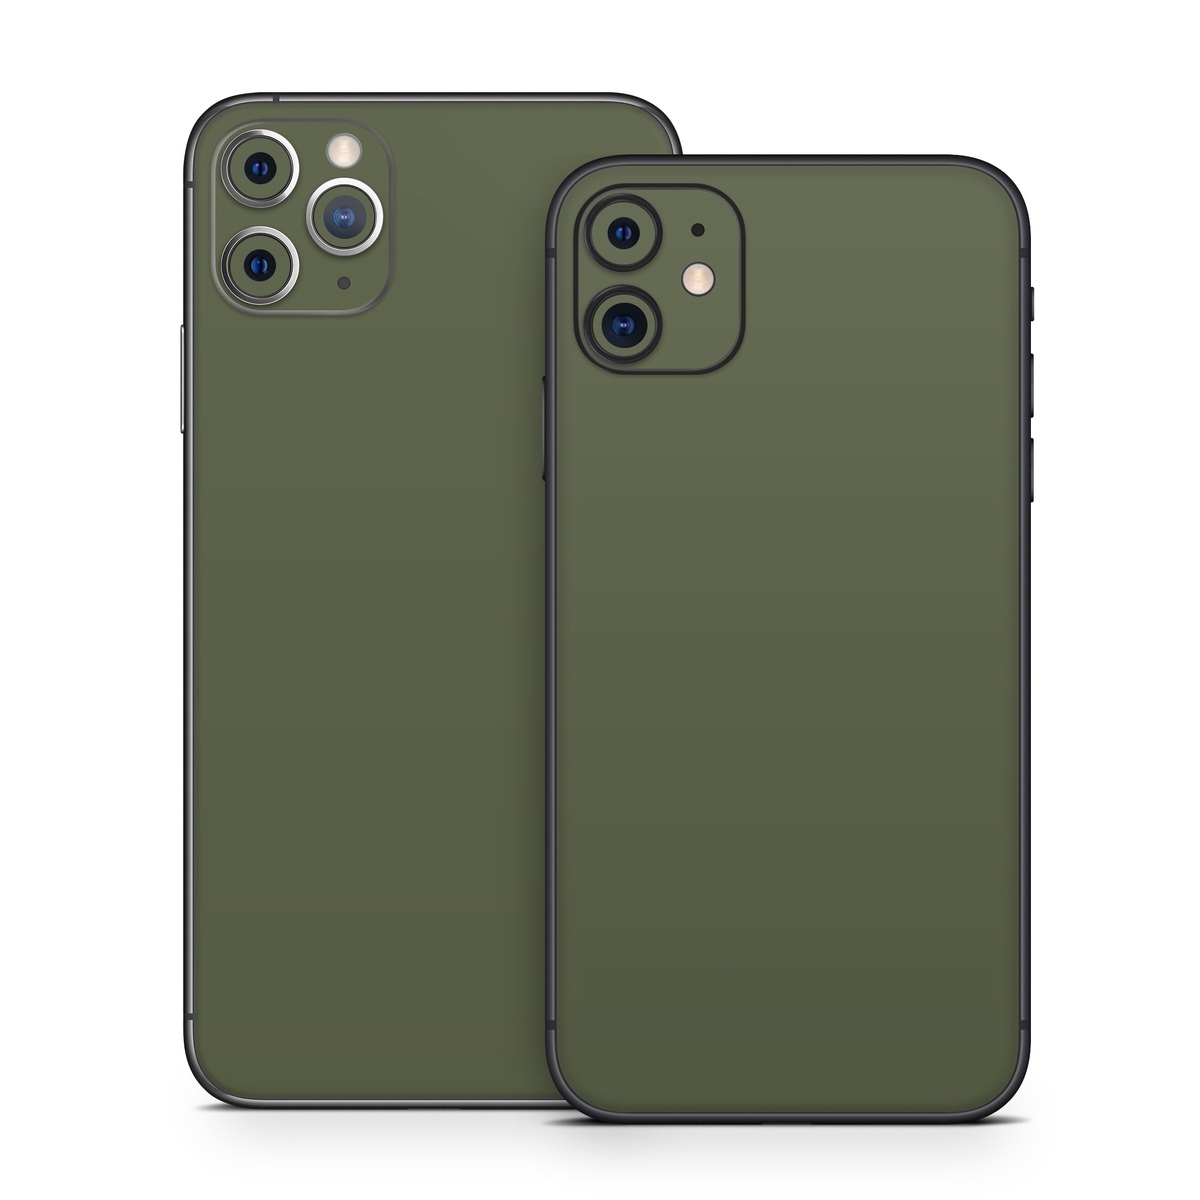 Apple iPhone 11 Skin - Solid State Olive Drab (Image 1)